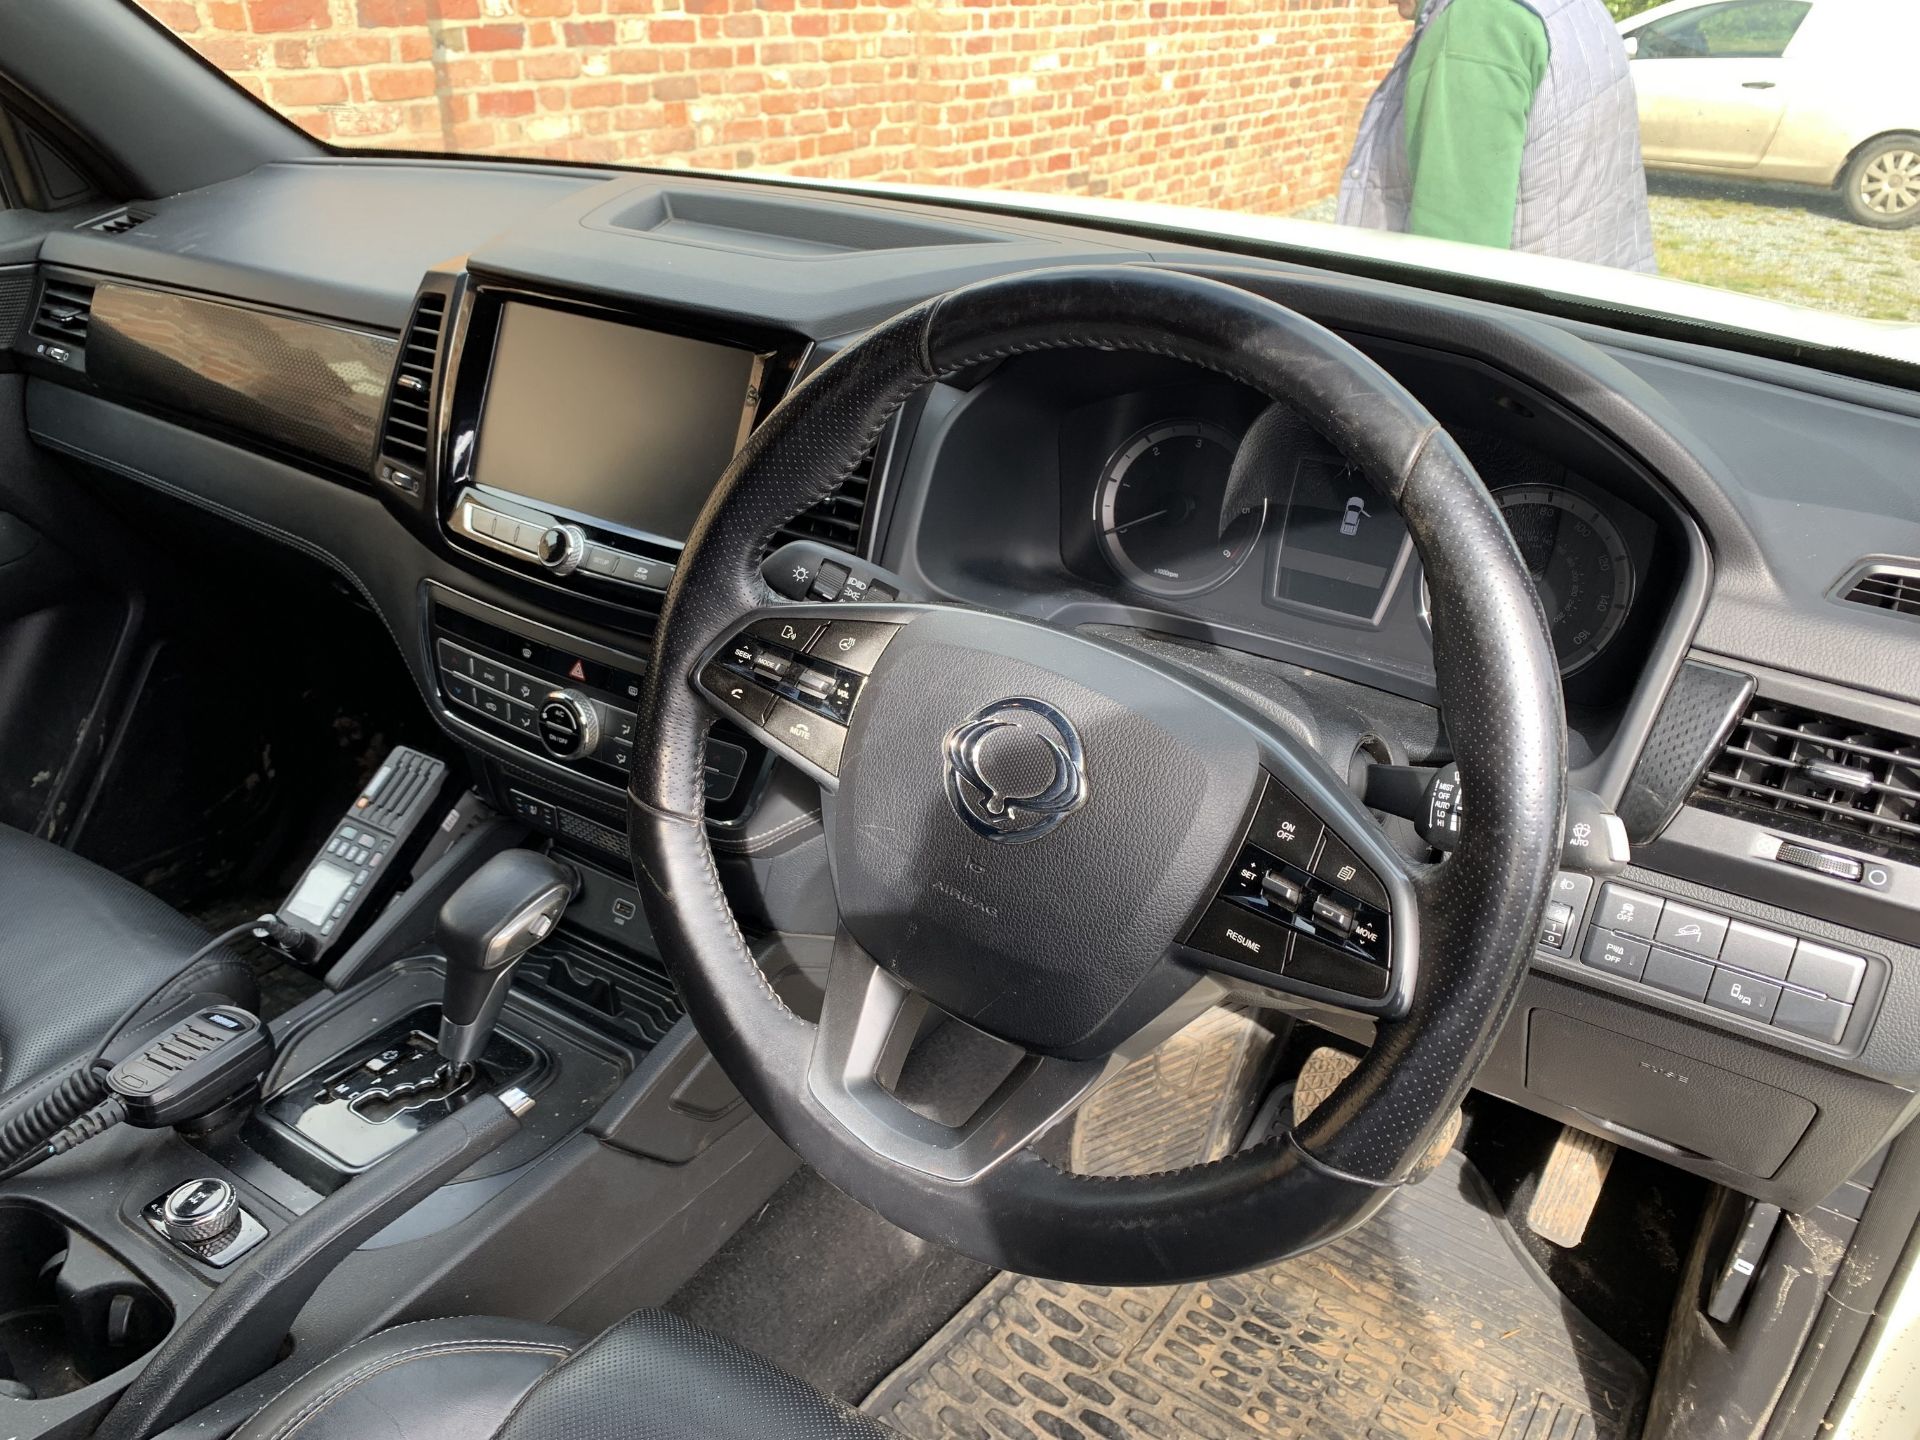 2020 Ssangyong Musso Rhino twin cab pickup, YX20 KZR, 38600 miles, 2.2l diesel, automatic, with - Image 6 of 10